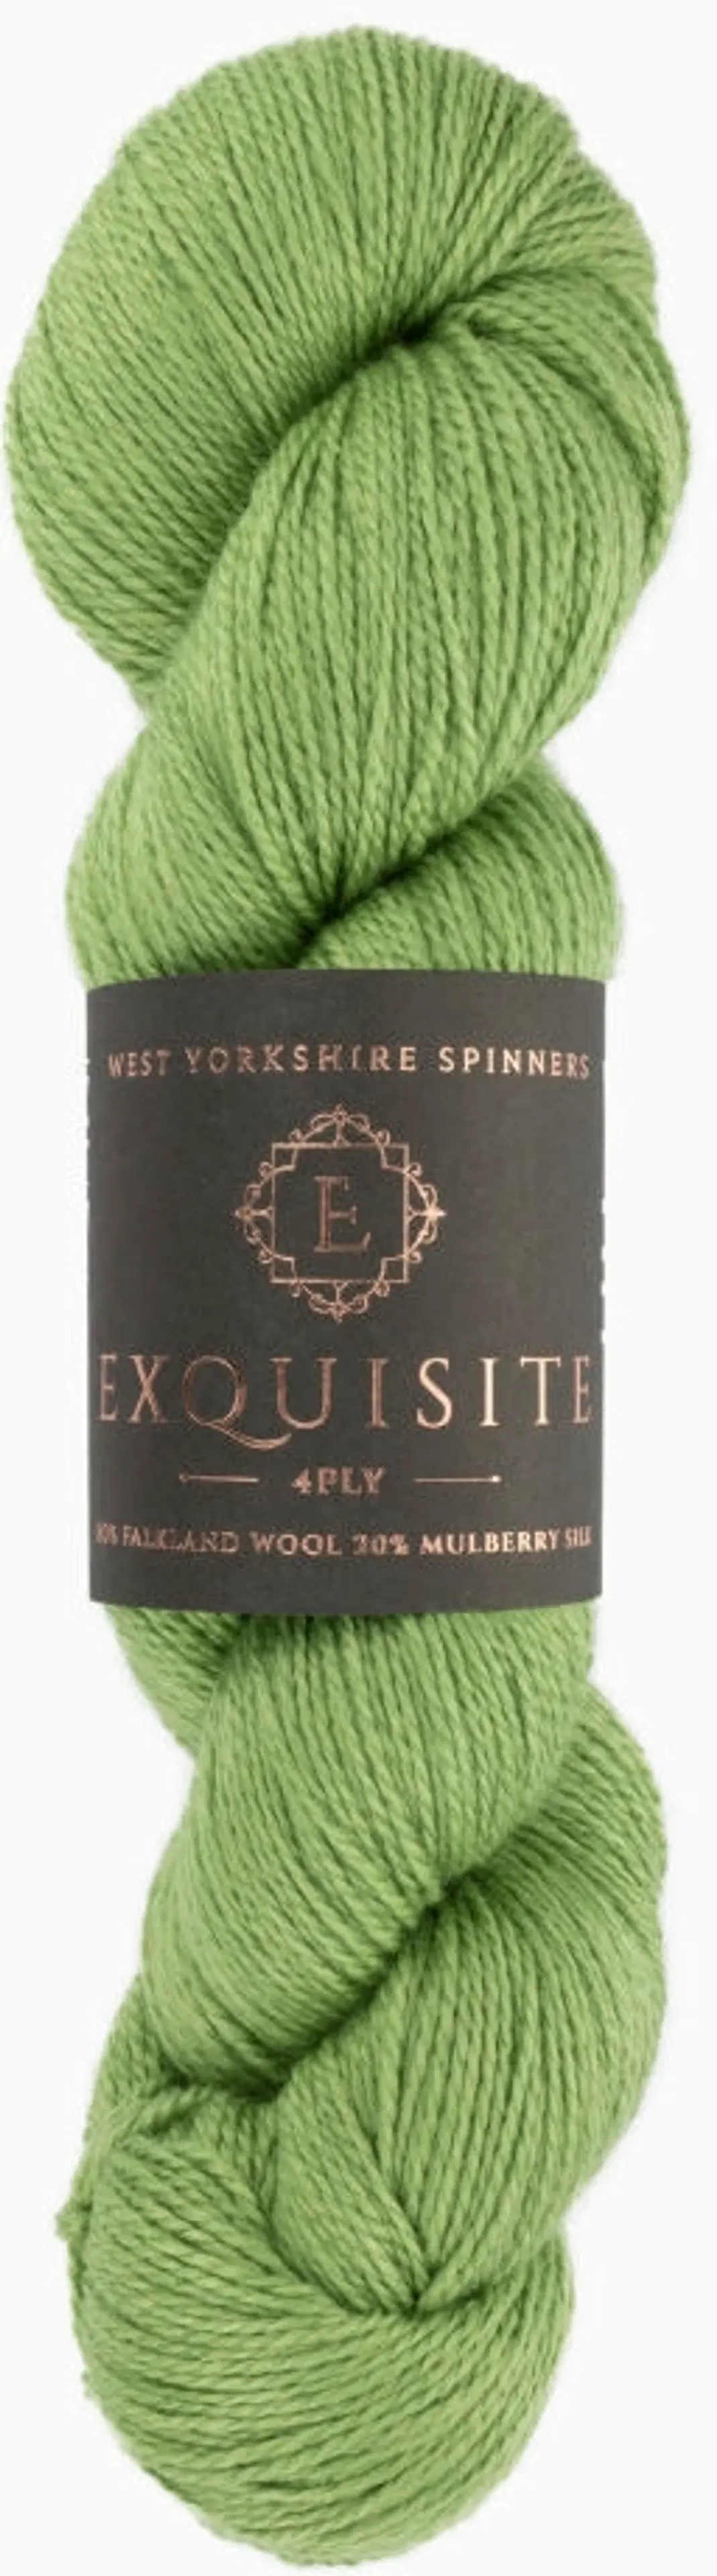 West Yorkshire Spinners lanka Exquisite 4PLY 100g Eden 401